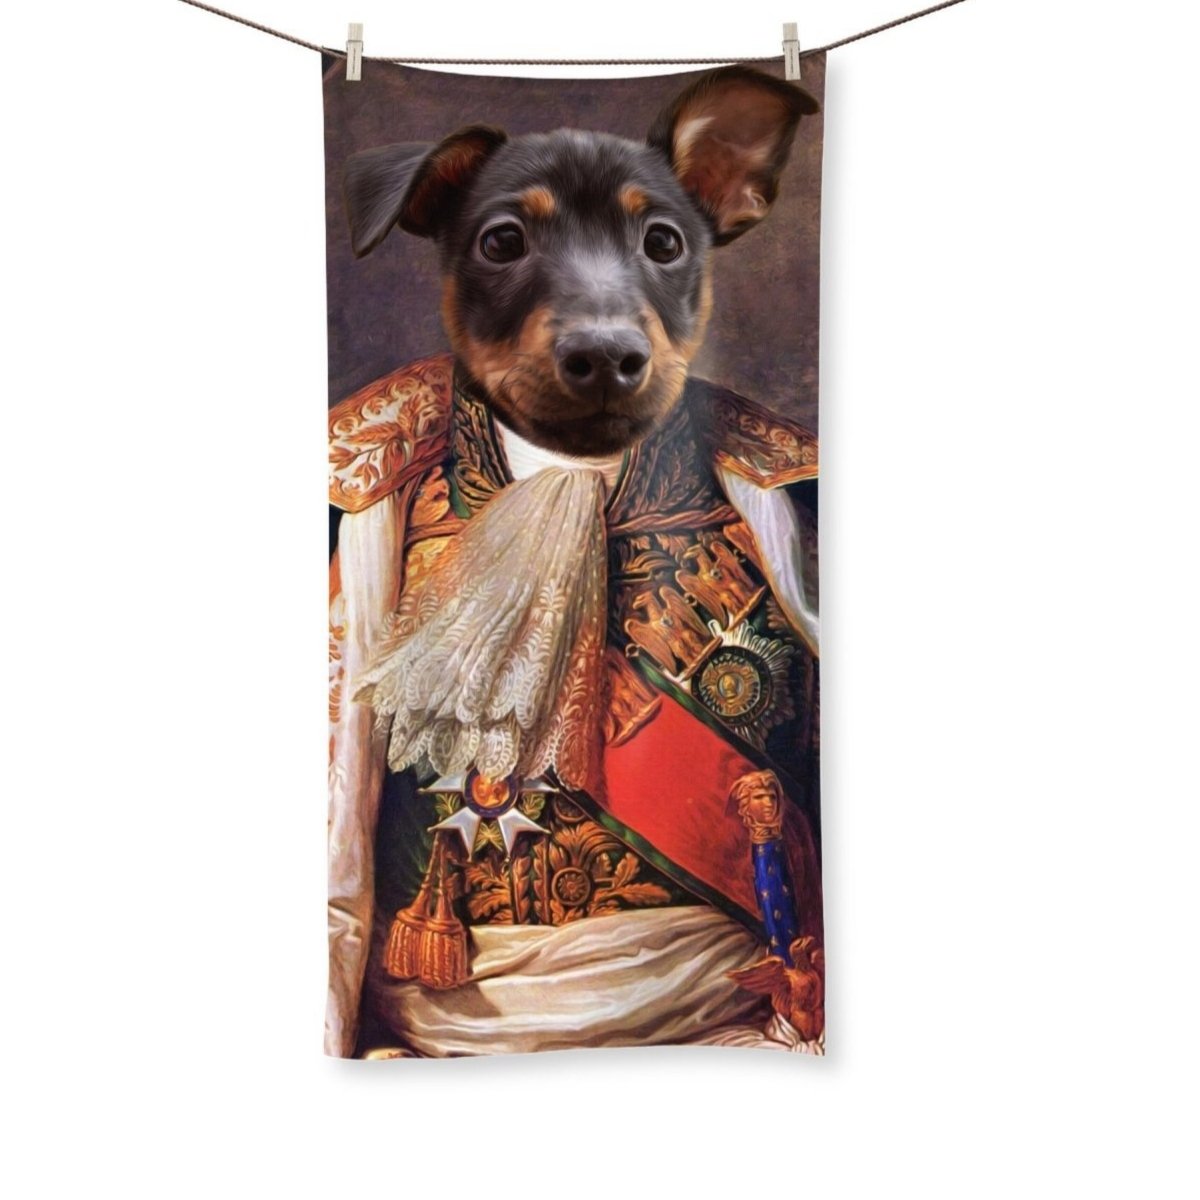 His Highness: Custom Pet Towel - Paw & Glory - #pet portraits# - #dog portraits# - #pet portraits uk#Paw & Glory, paw and glory, small dog portrait, aristocratic dog portraits, dog portrait background colors, best dog artists, admiral dog portrait, dog portraits admiral, pet portrait,custom pet portrait Towel